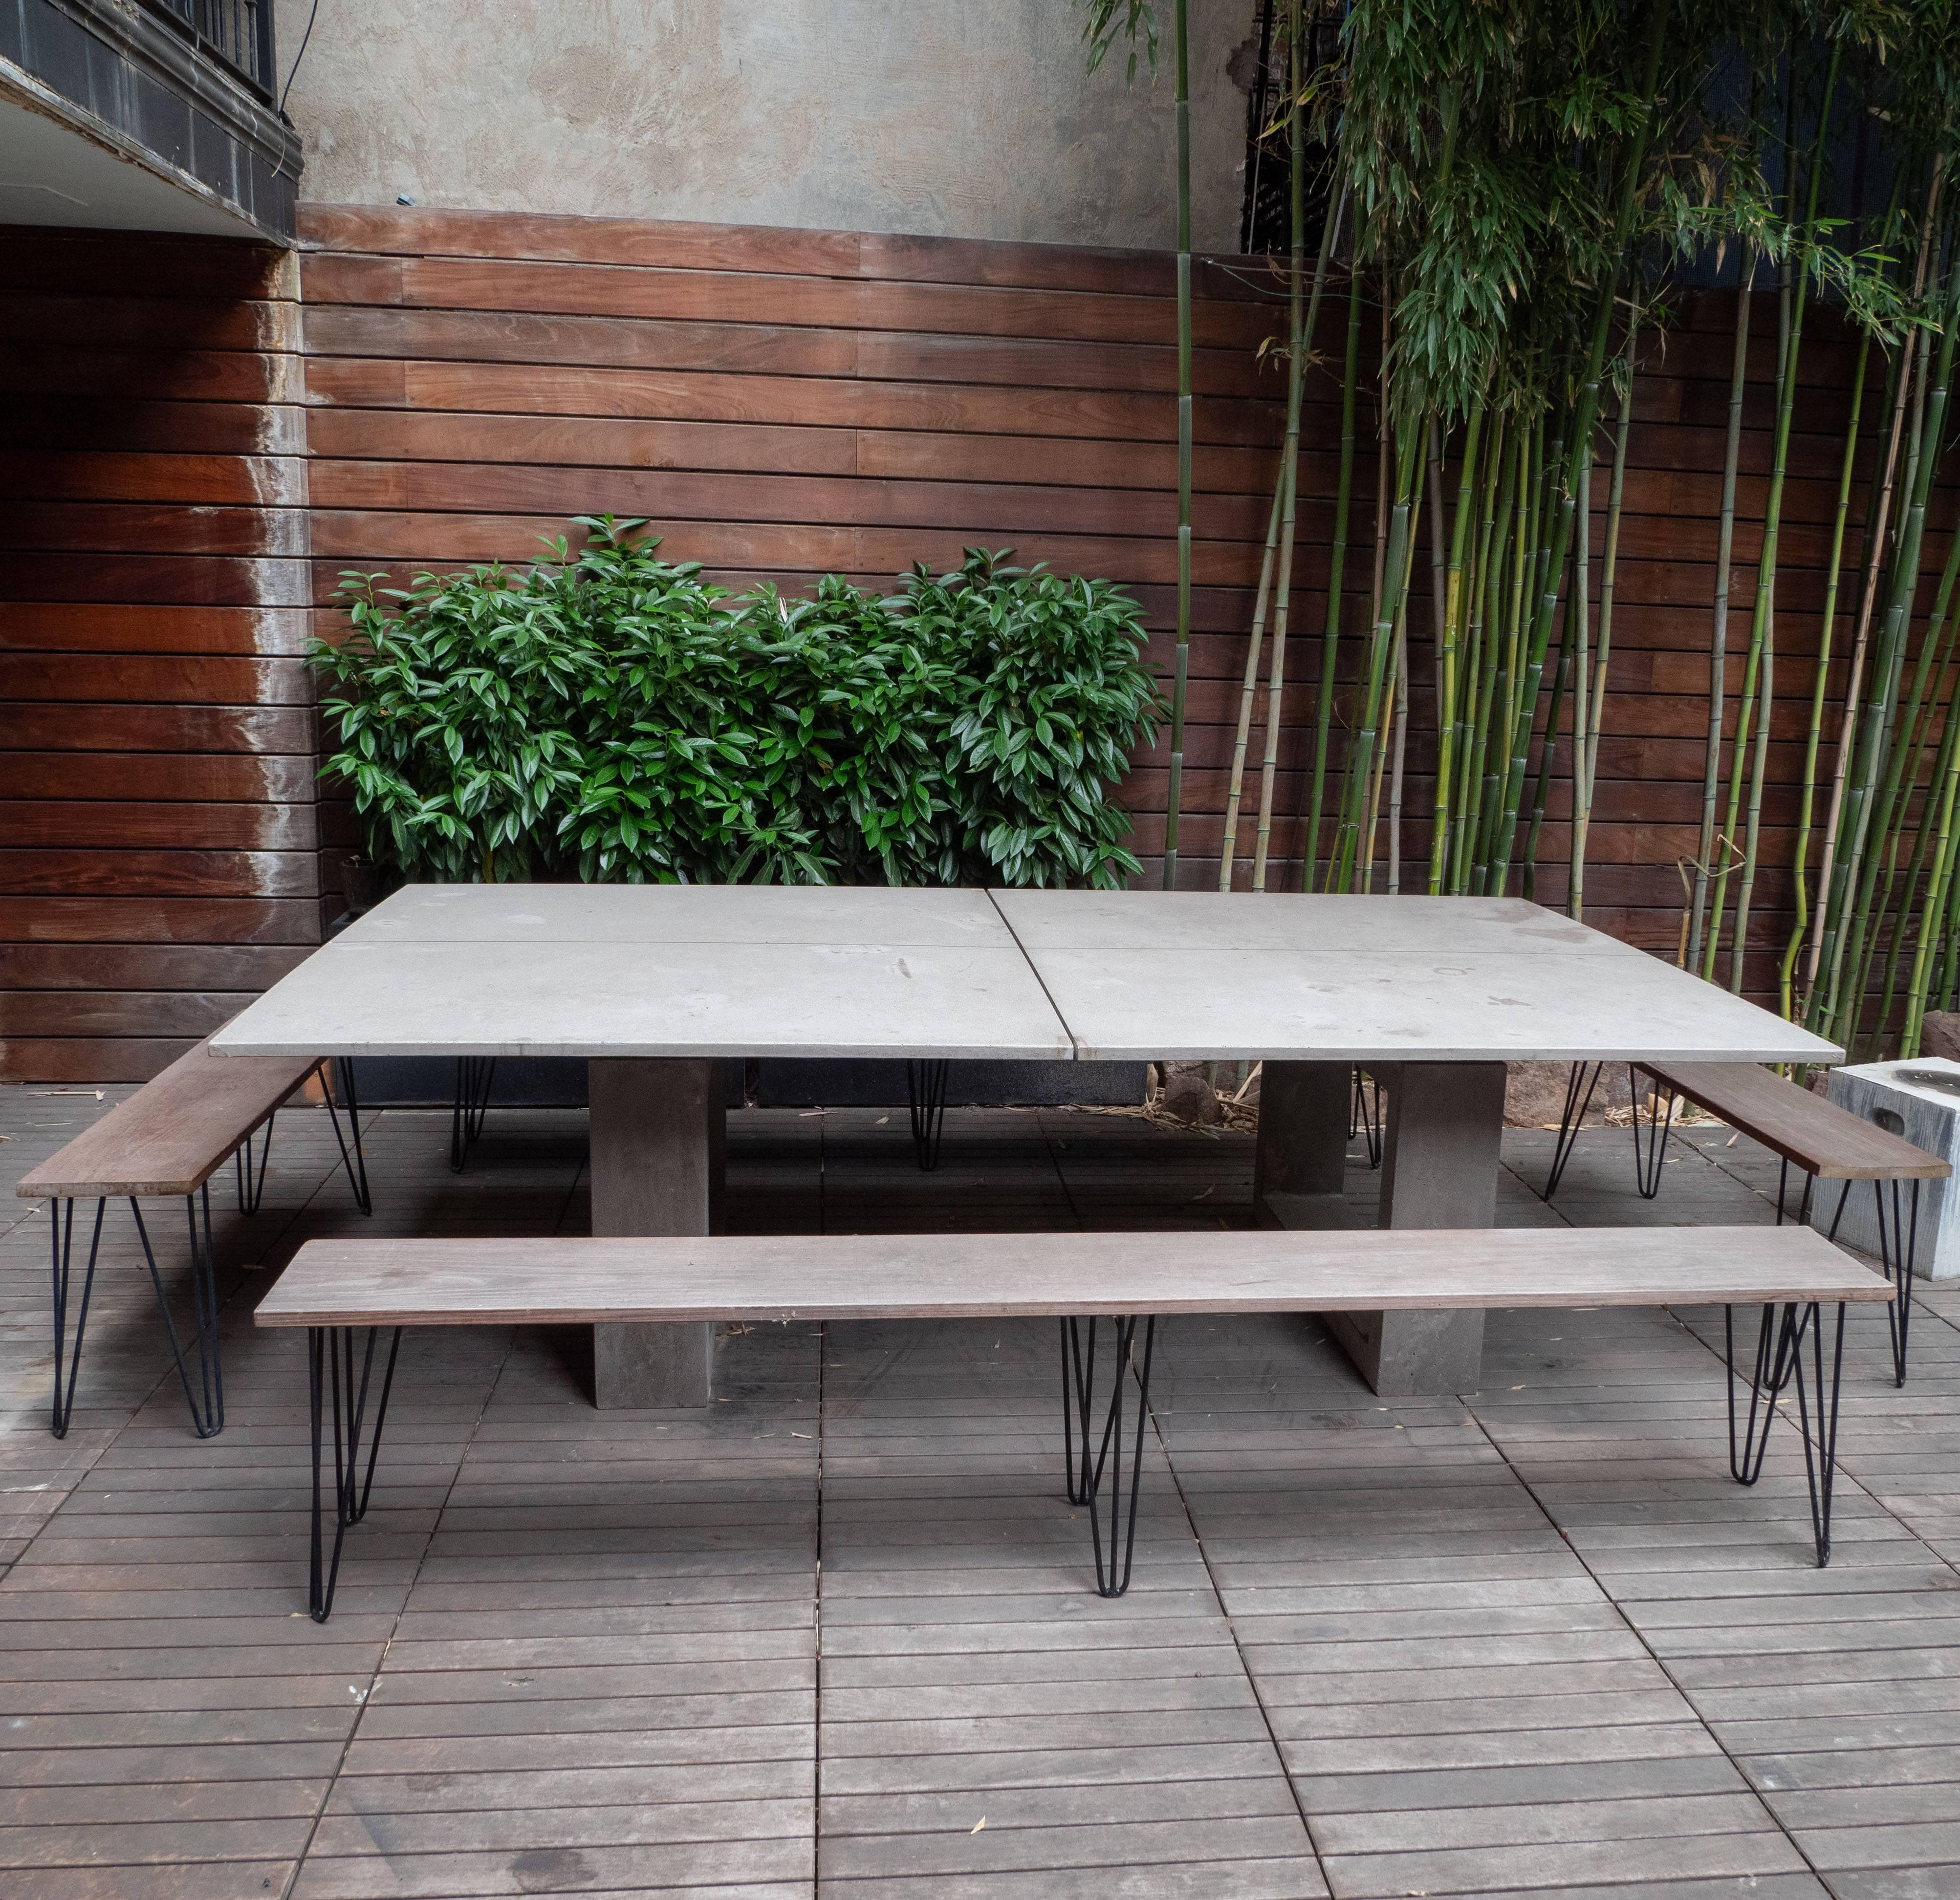 James de Wulf Outdoor Concrete Ping Pong and Dining Table 2